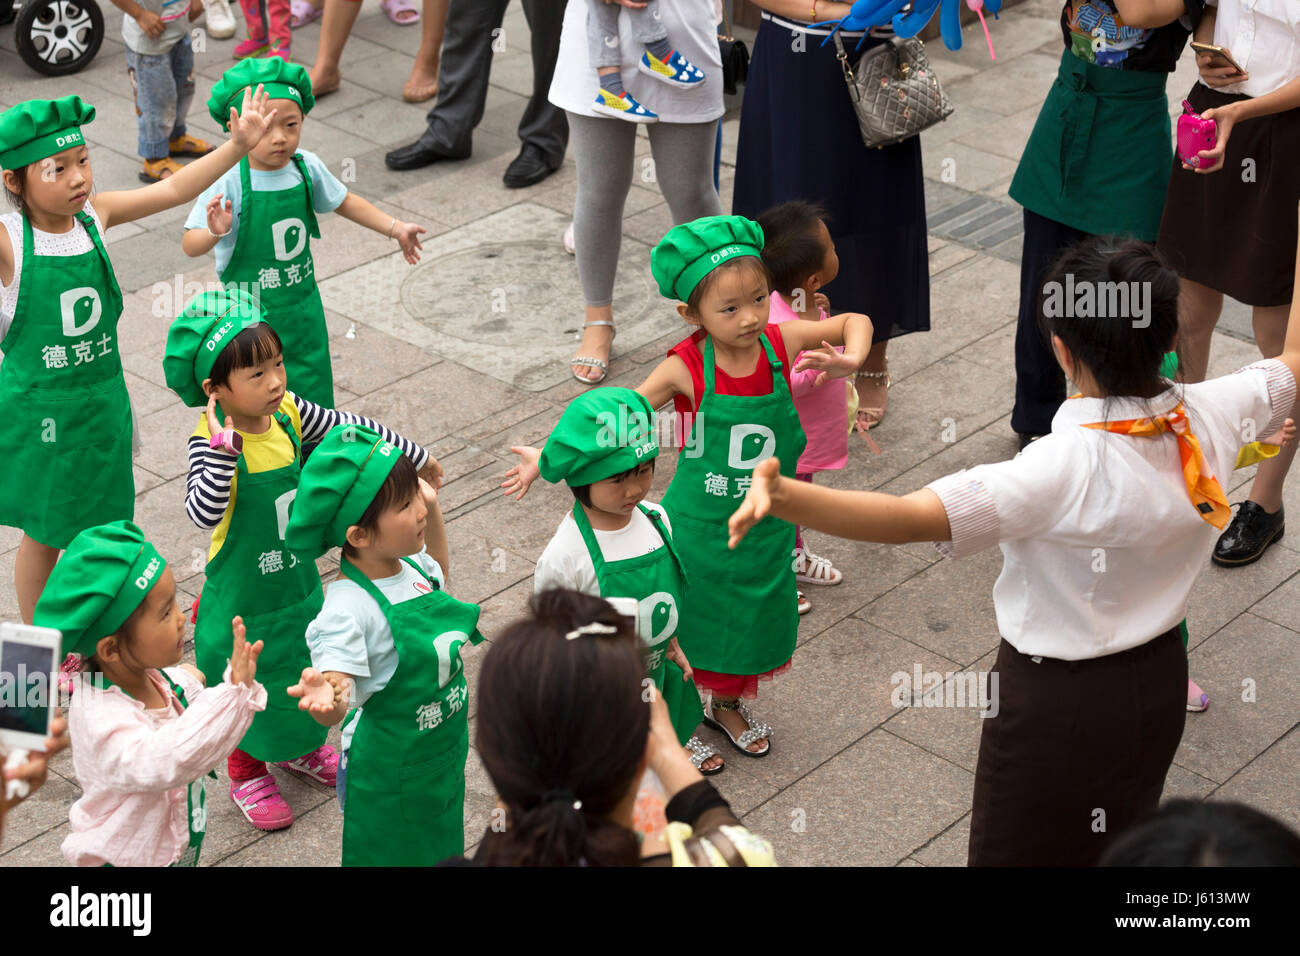 Chinese children learning to dance at fast food restaurant, Yinchuan, Ningxia, China Stock Photo